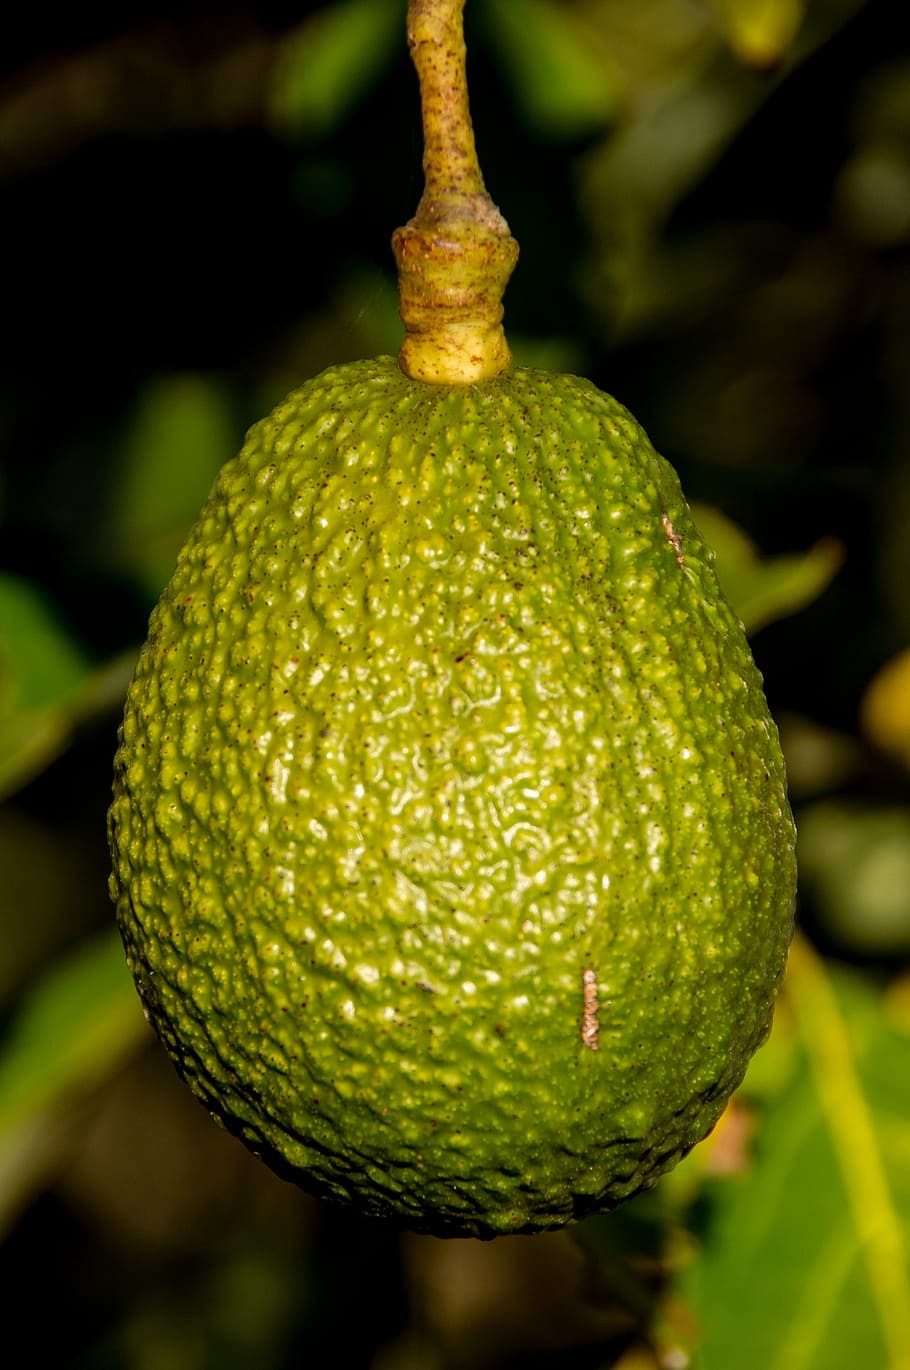 hass avocado, fruit, tree, green, growing, close-up, freshness